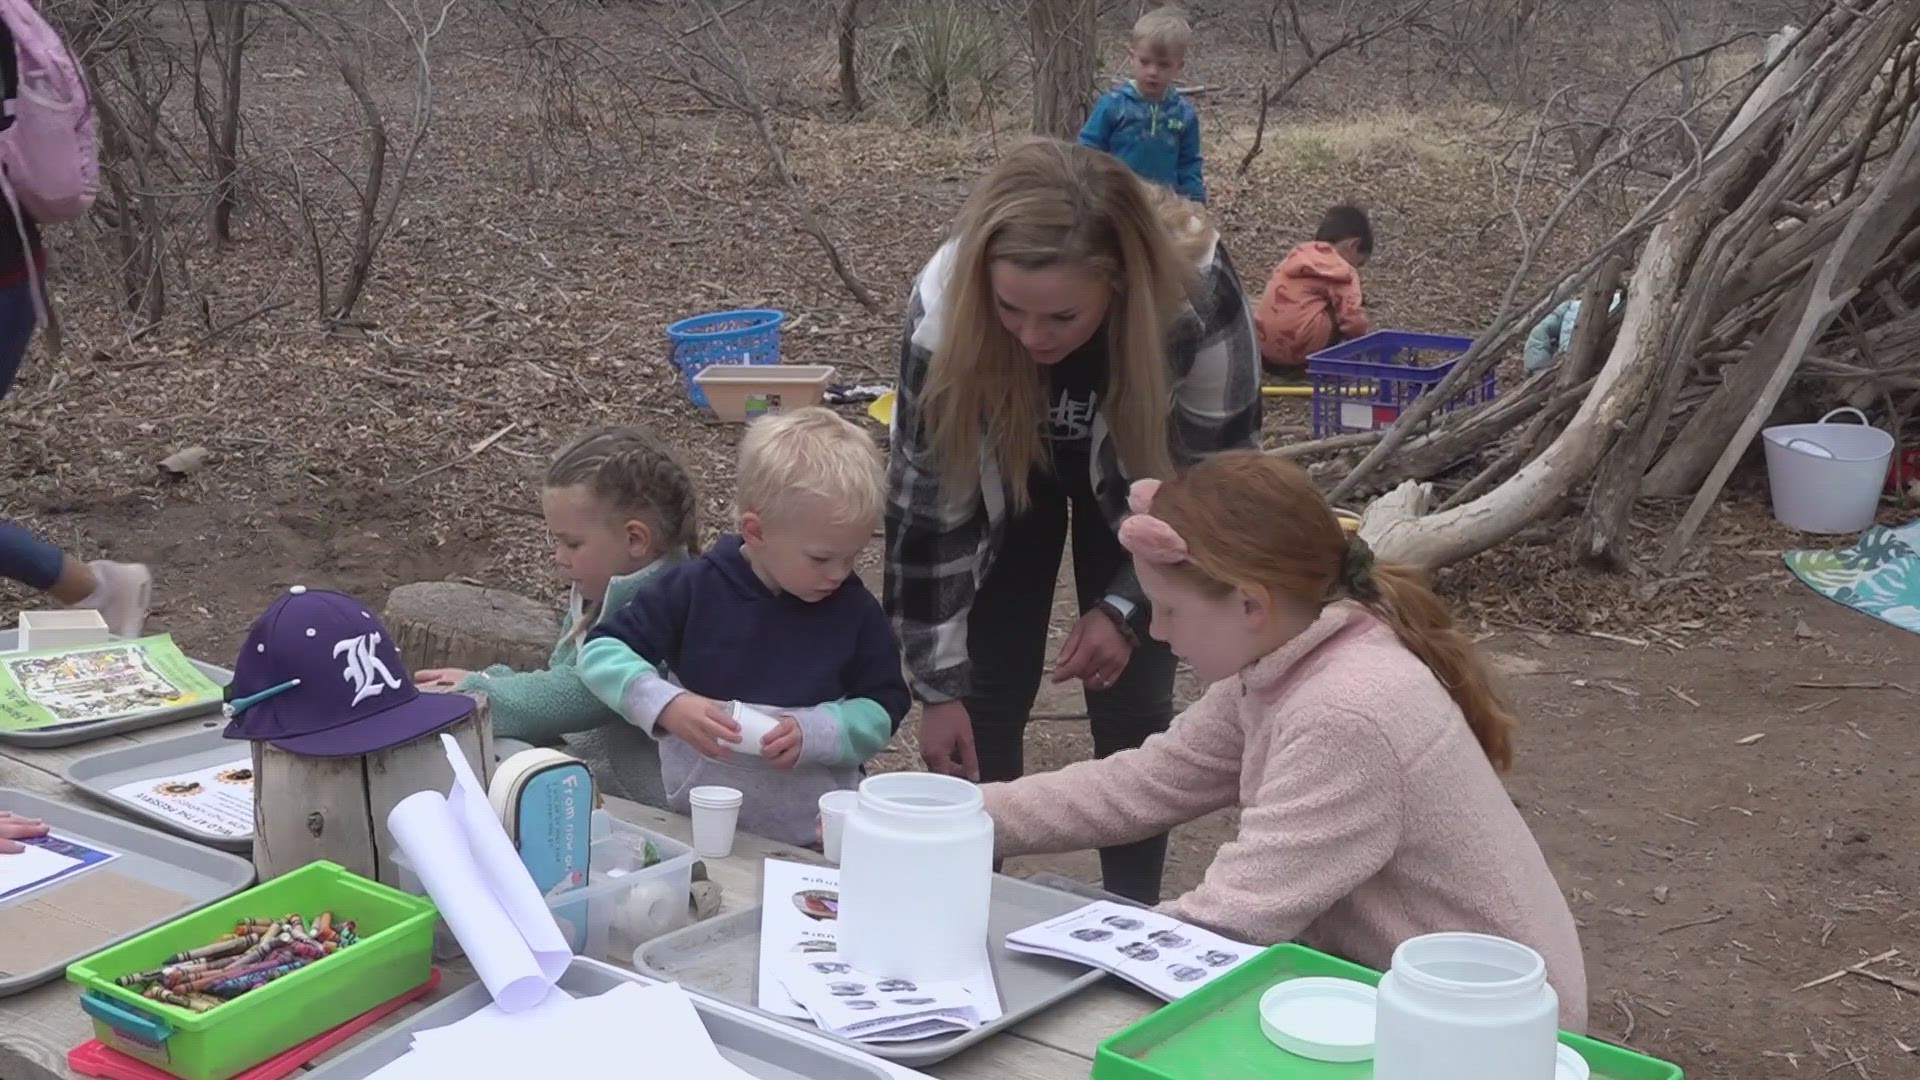 These free events help young children develop valuable skills through nature-based activities.